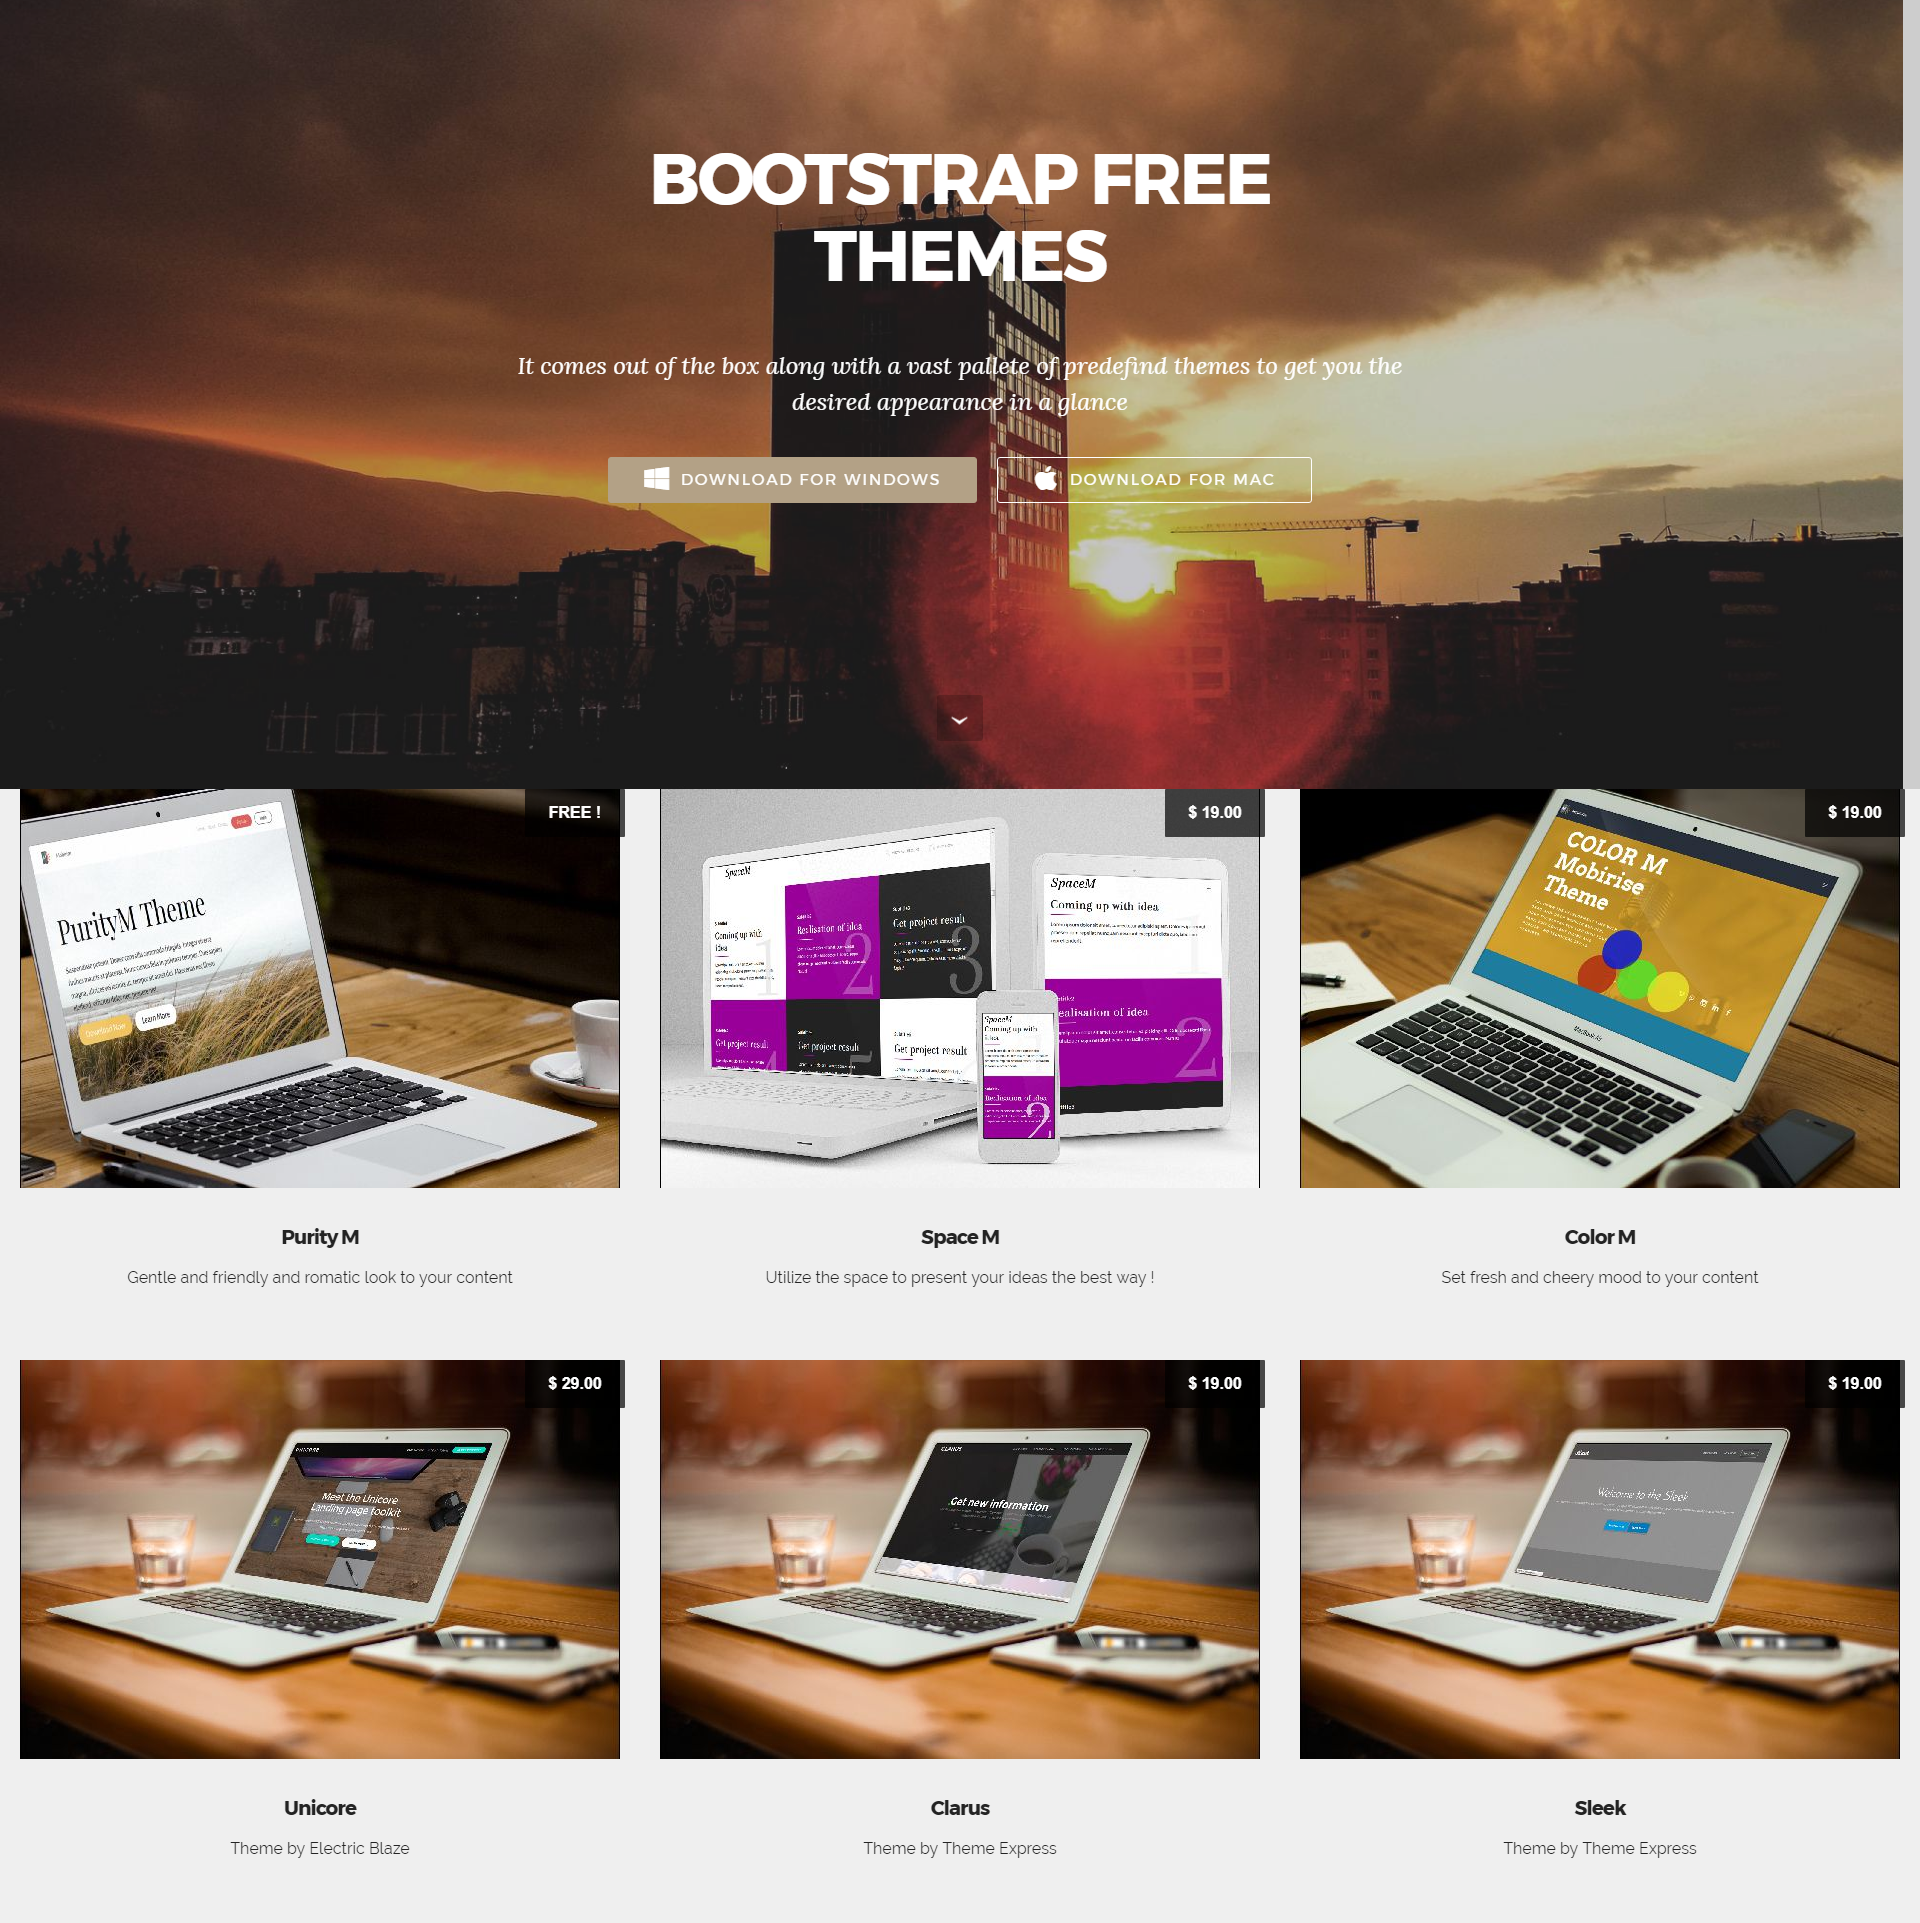 HTML5 Bootstrap Mobile-friendly Templates